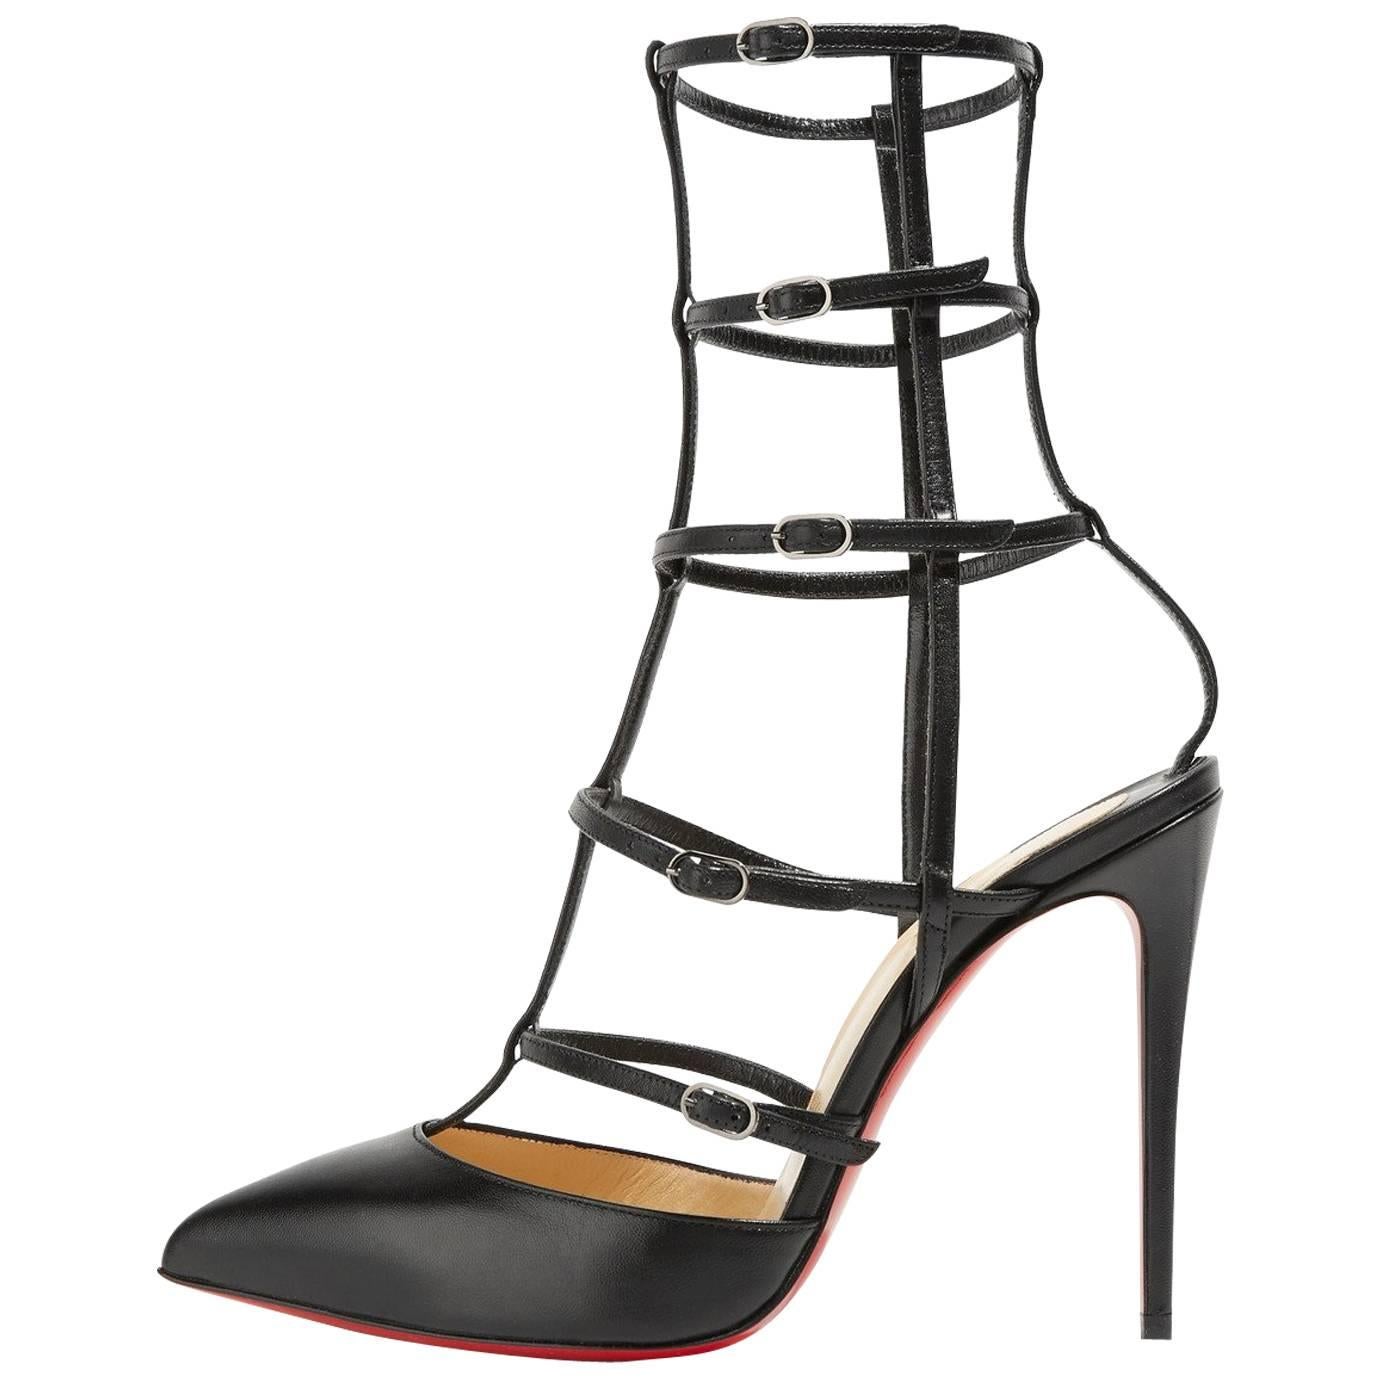 Christian Louboutin Black Leather Cage Evening Sandals Heels Pumps in Box